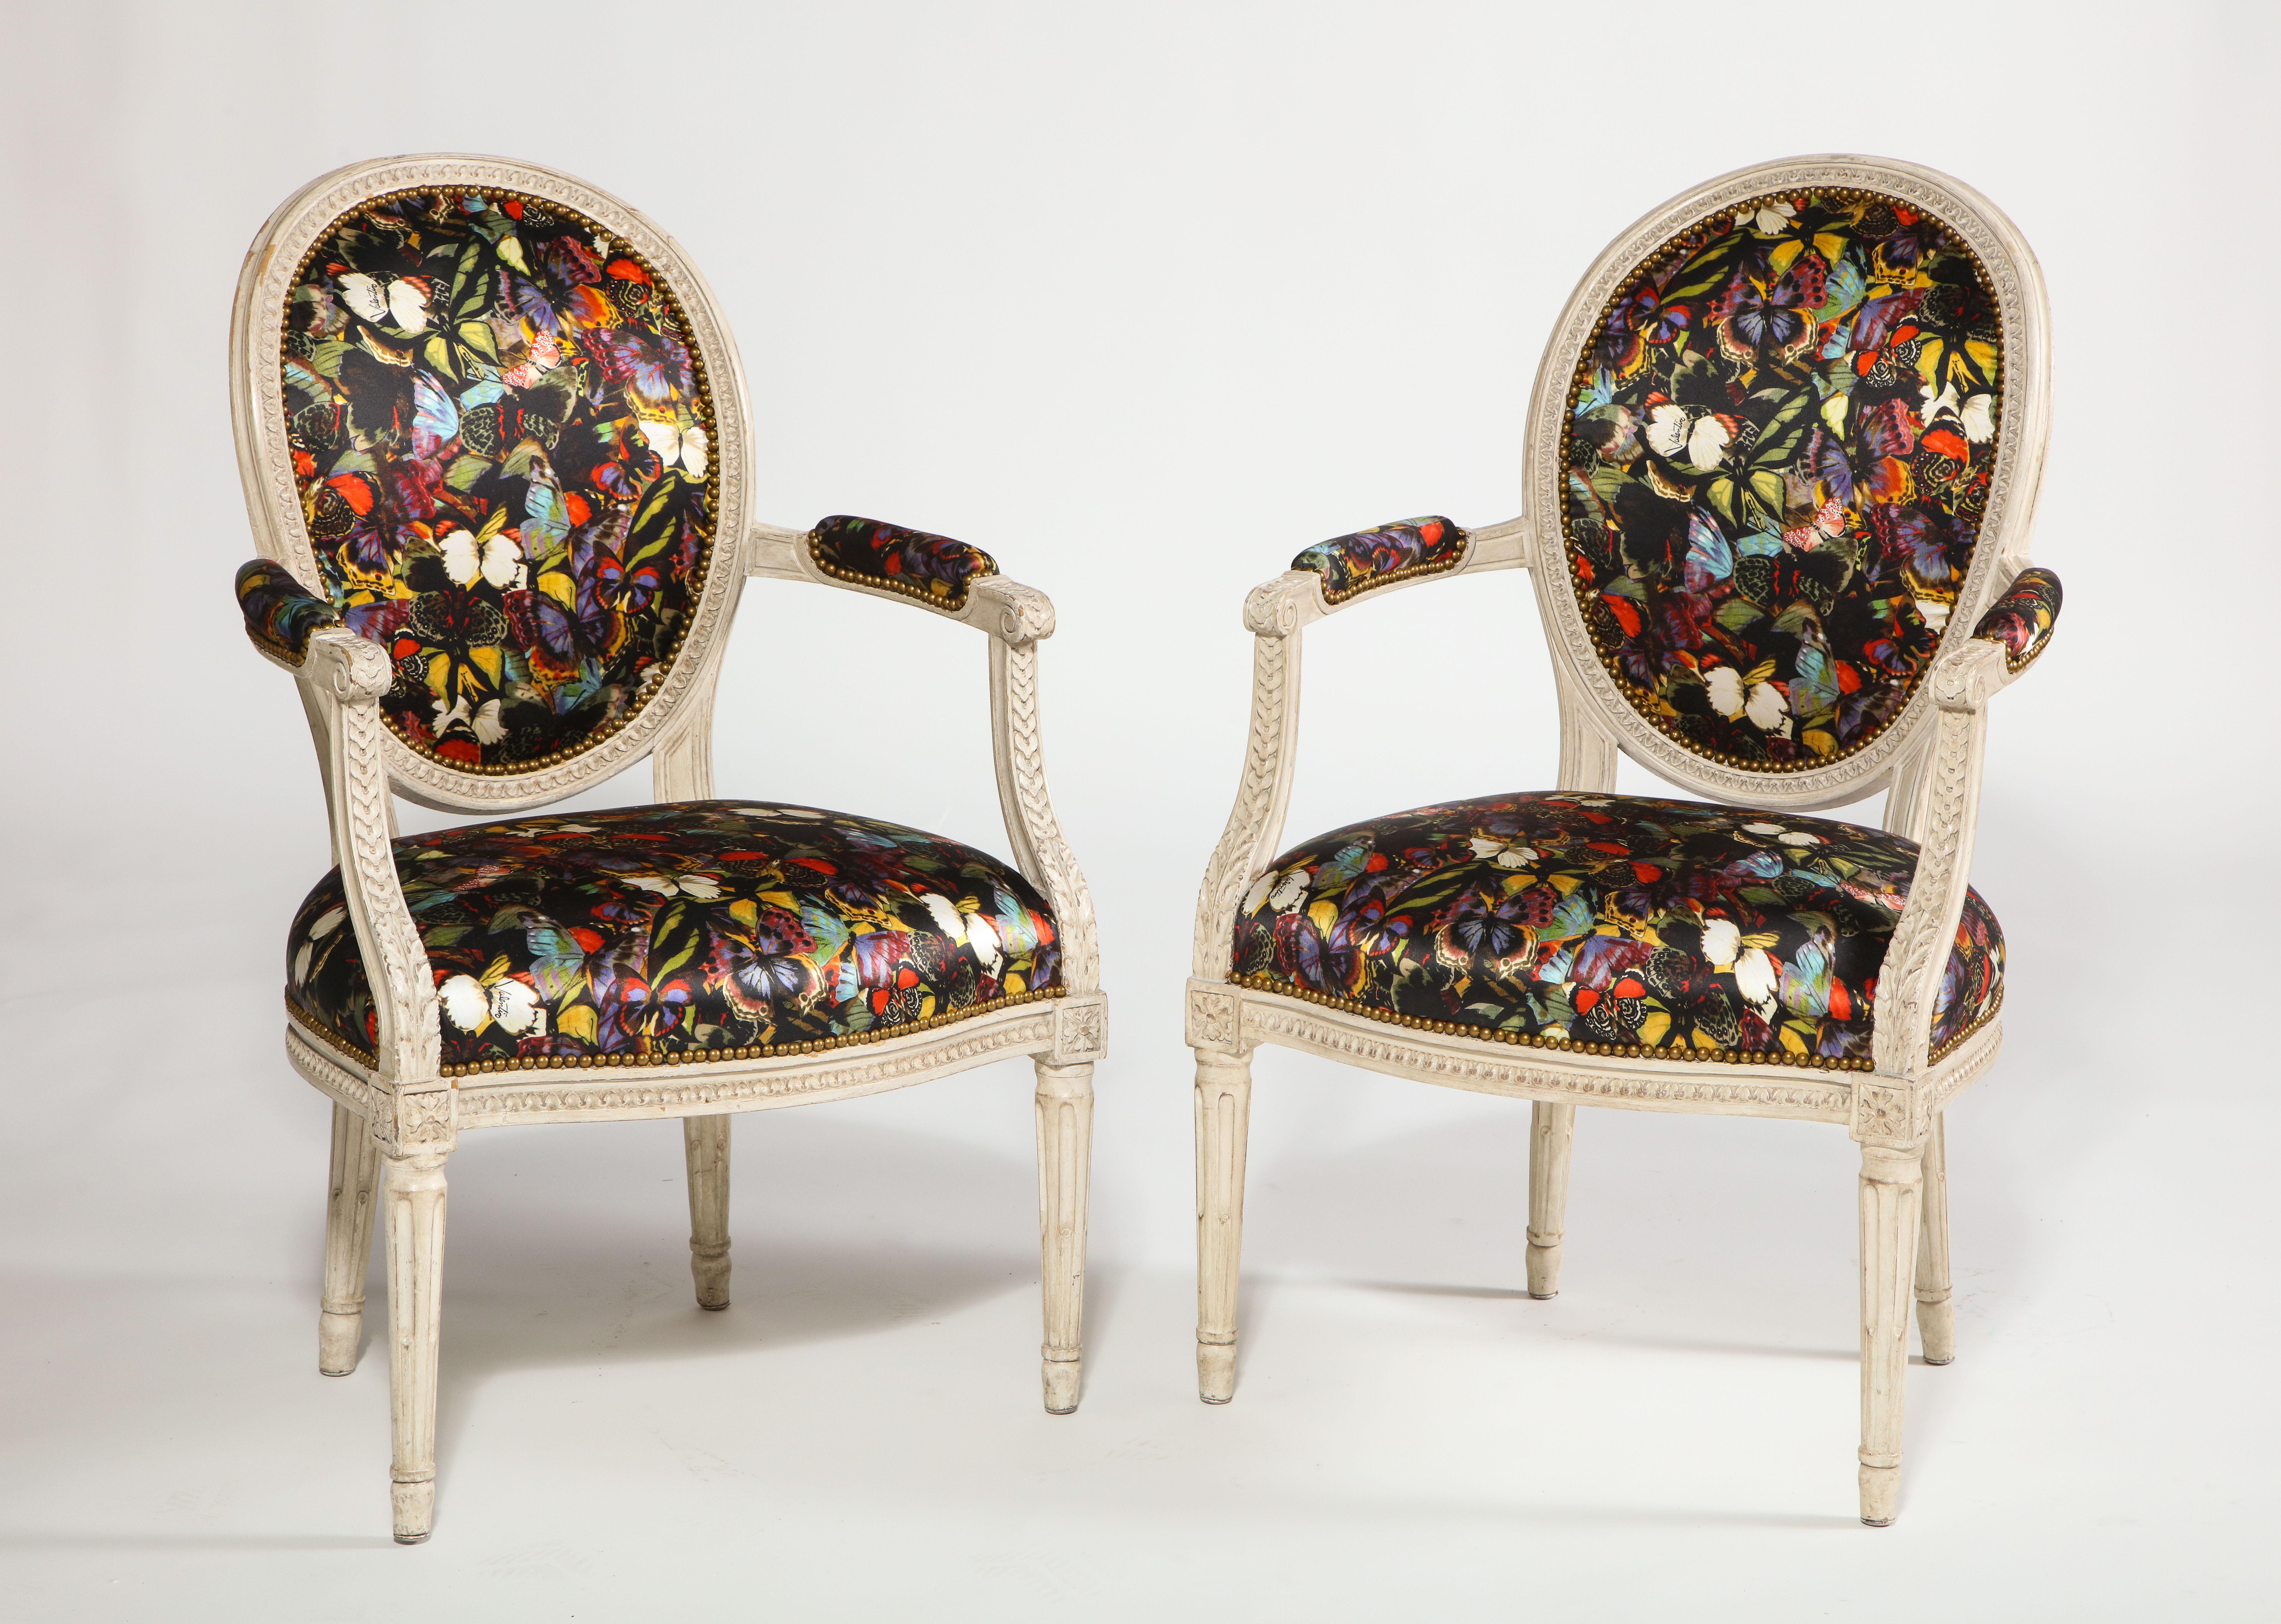 Antique French armchairs in Valentino butterfly silk, pair

Measures: 24